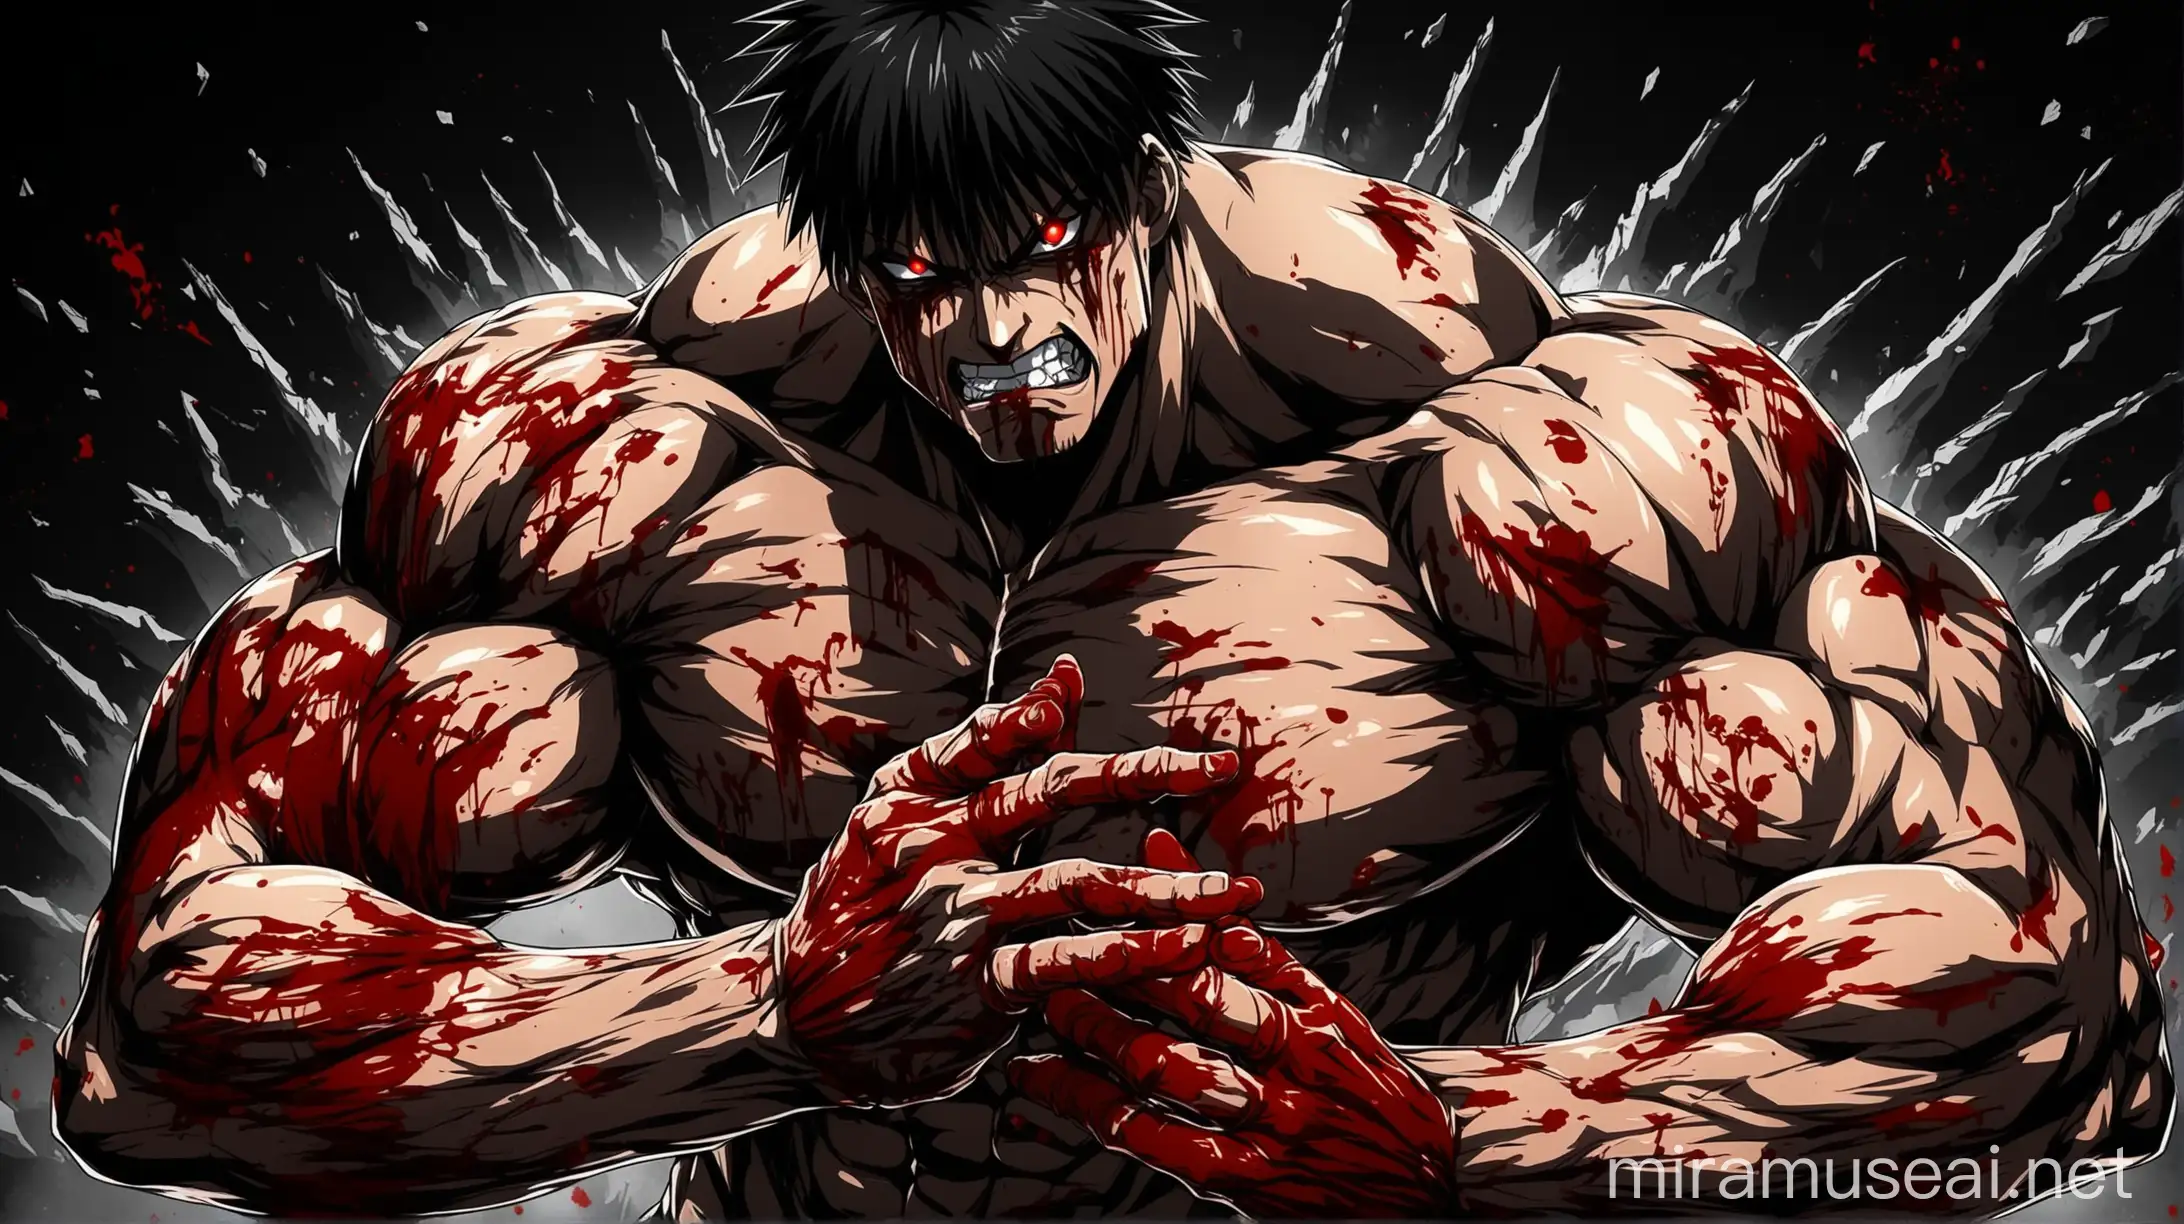 Intense Anime Character with Bloody Hands A Fearsome and Commanding Presence